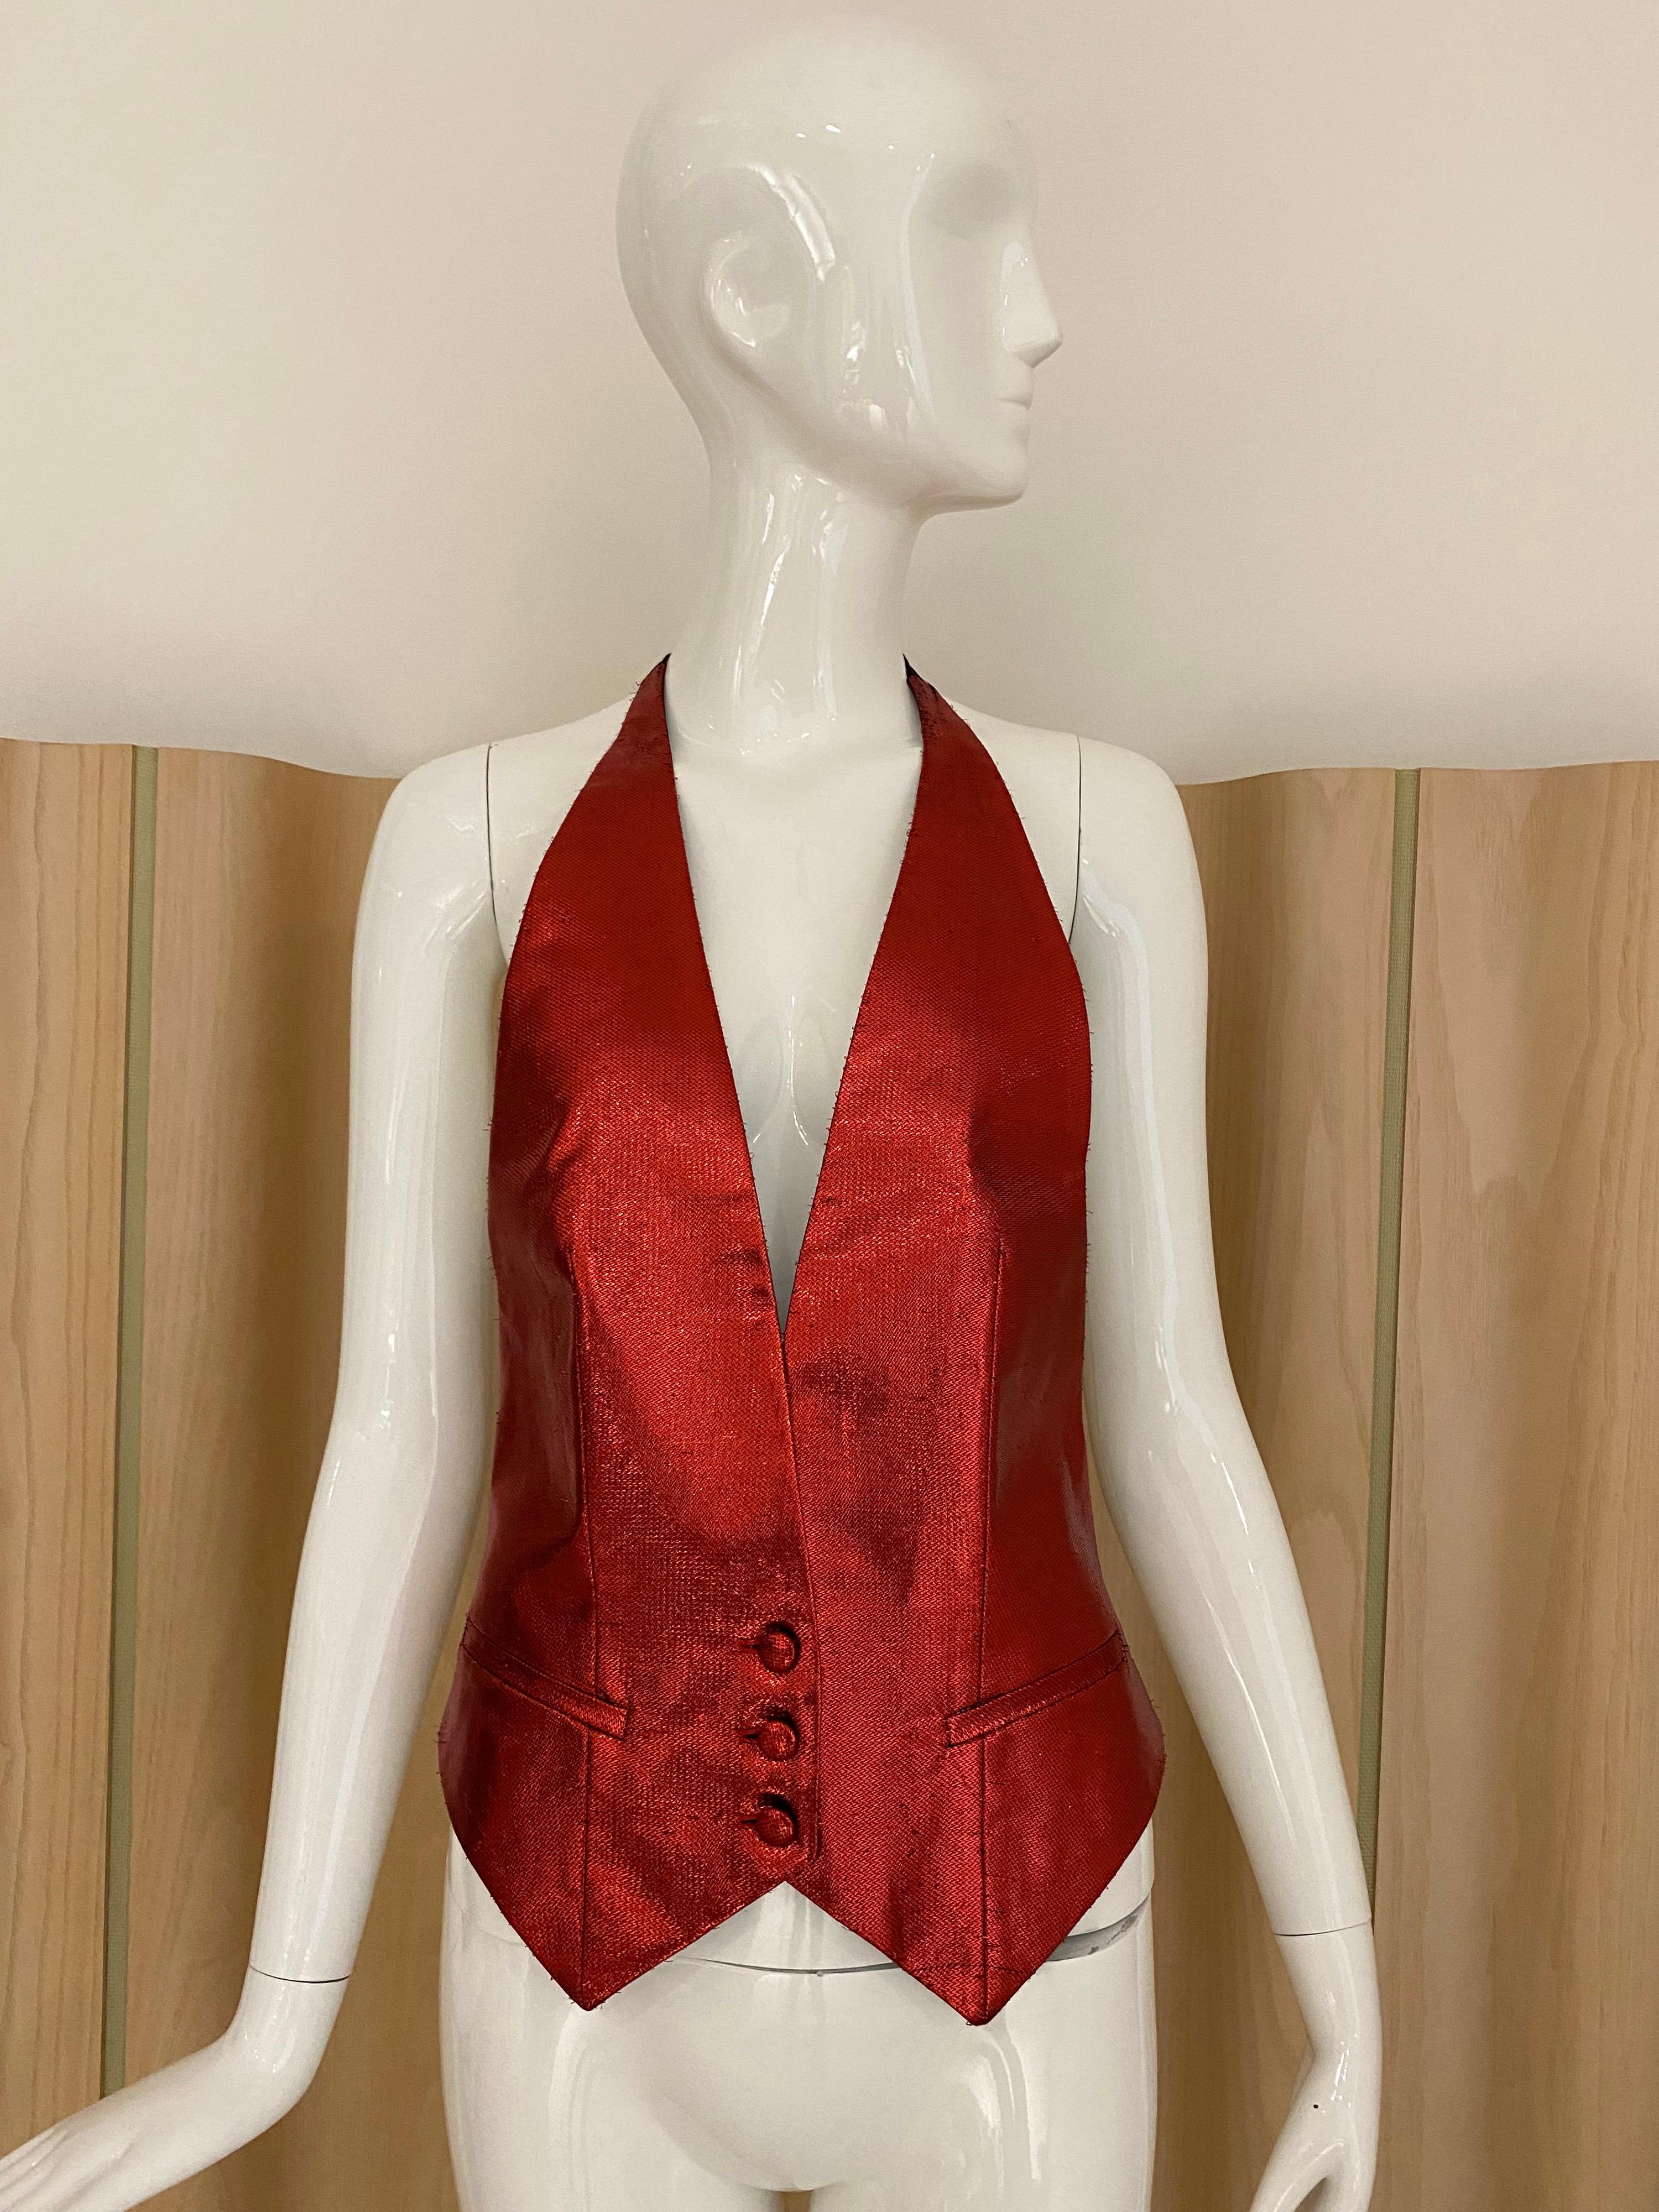 Maison Martin Margiela Red Silk Vest  In Excellent Condition For Sale In Beverly Hills, CA